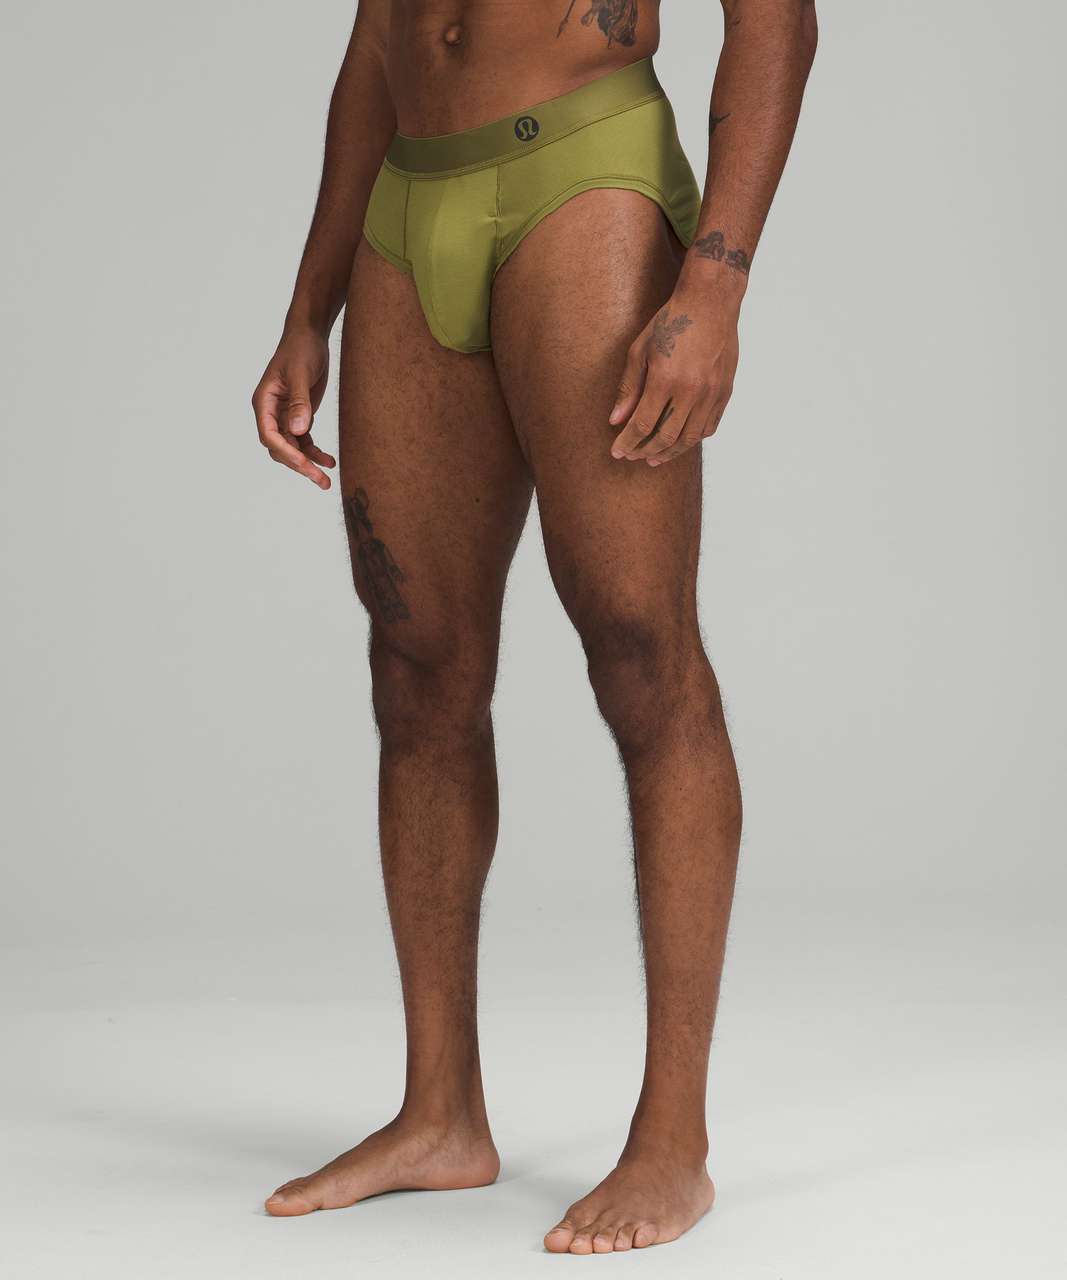 Thoughts on the new men's Always In Motion Brief? : r/lululemon